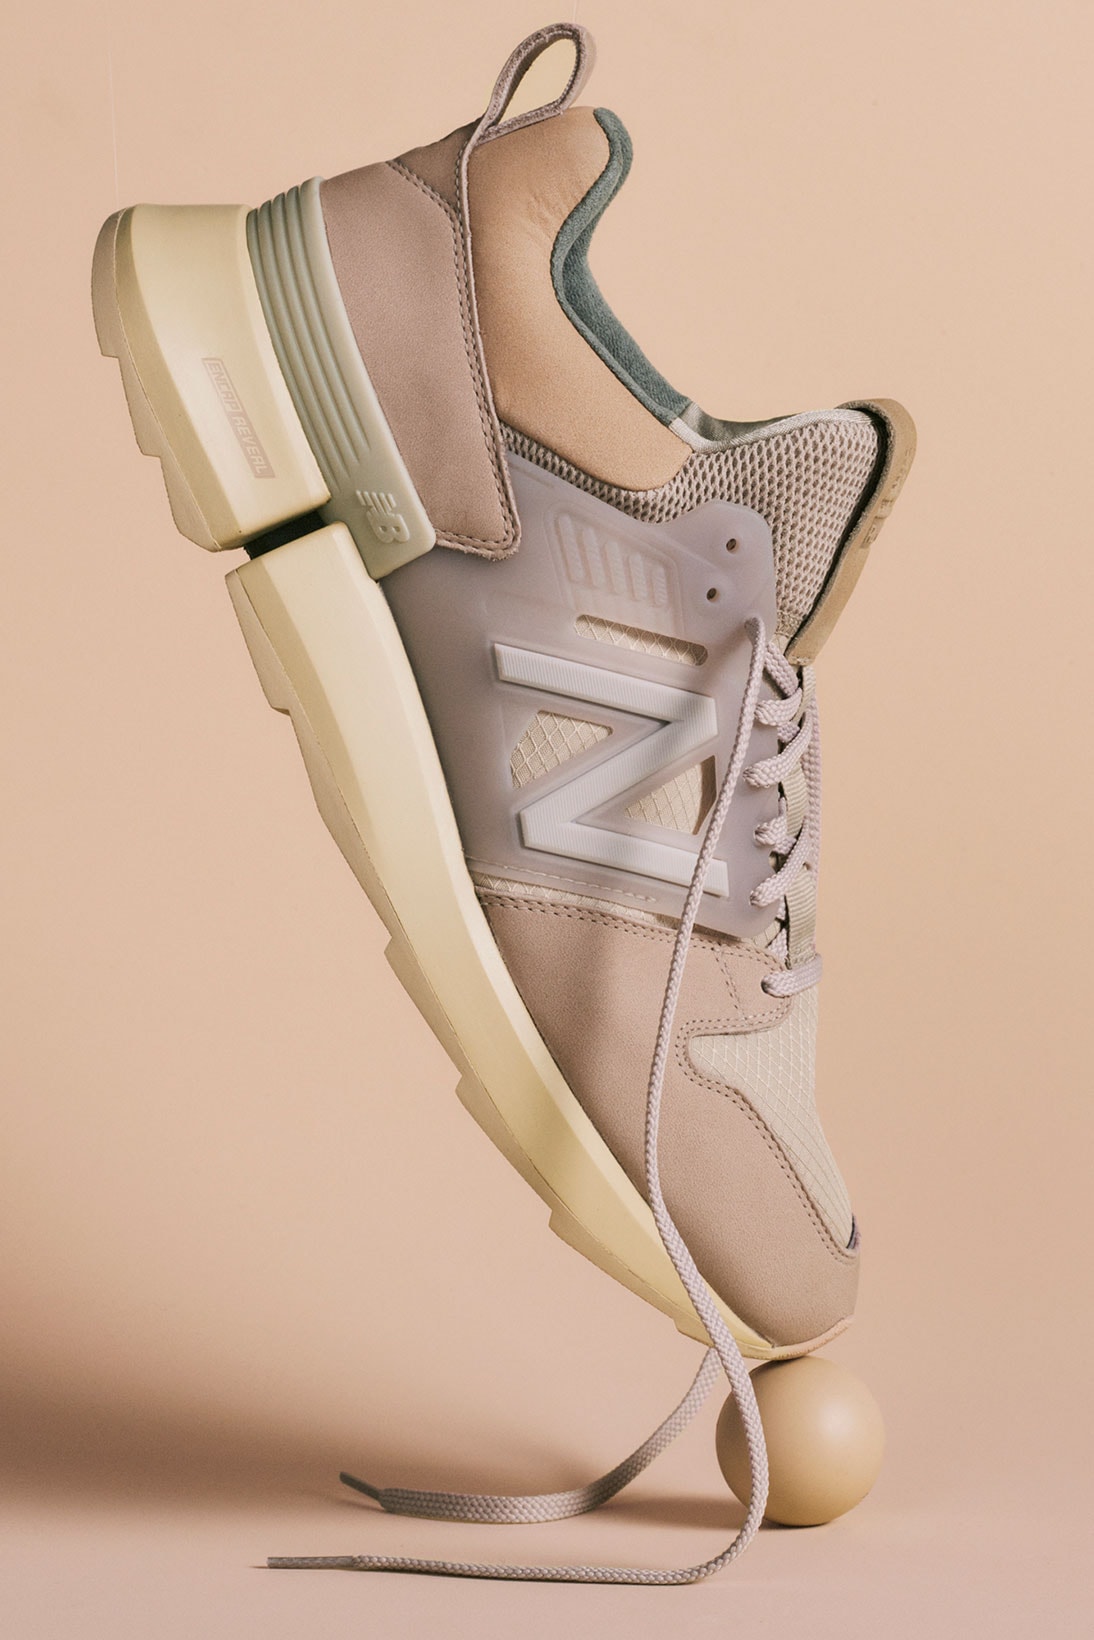 auralee new balance tokyo design studio rc 2 sneakers collaboration nude pink olive green kicks sneakerhead footwear shoes lateral